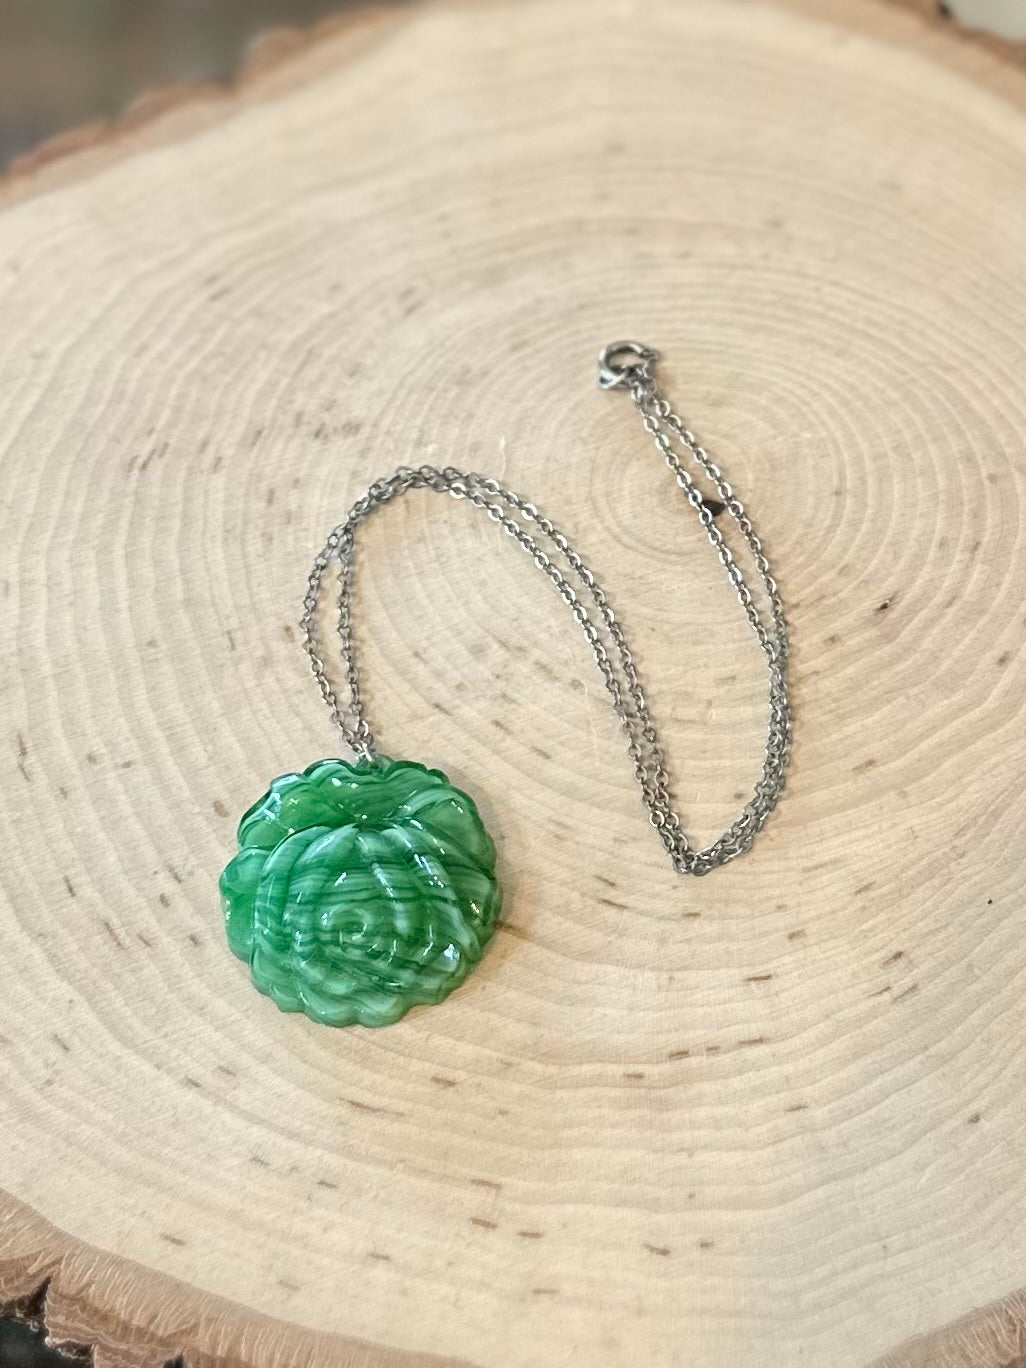 Vintage Carved Green Slag Glass Cabbage Rose Pendant Necklace Dainty Silver Tone Chain 15.25”